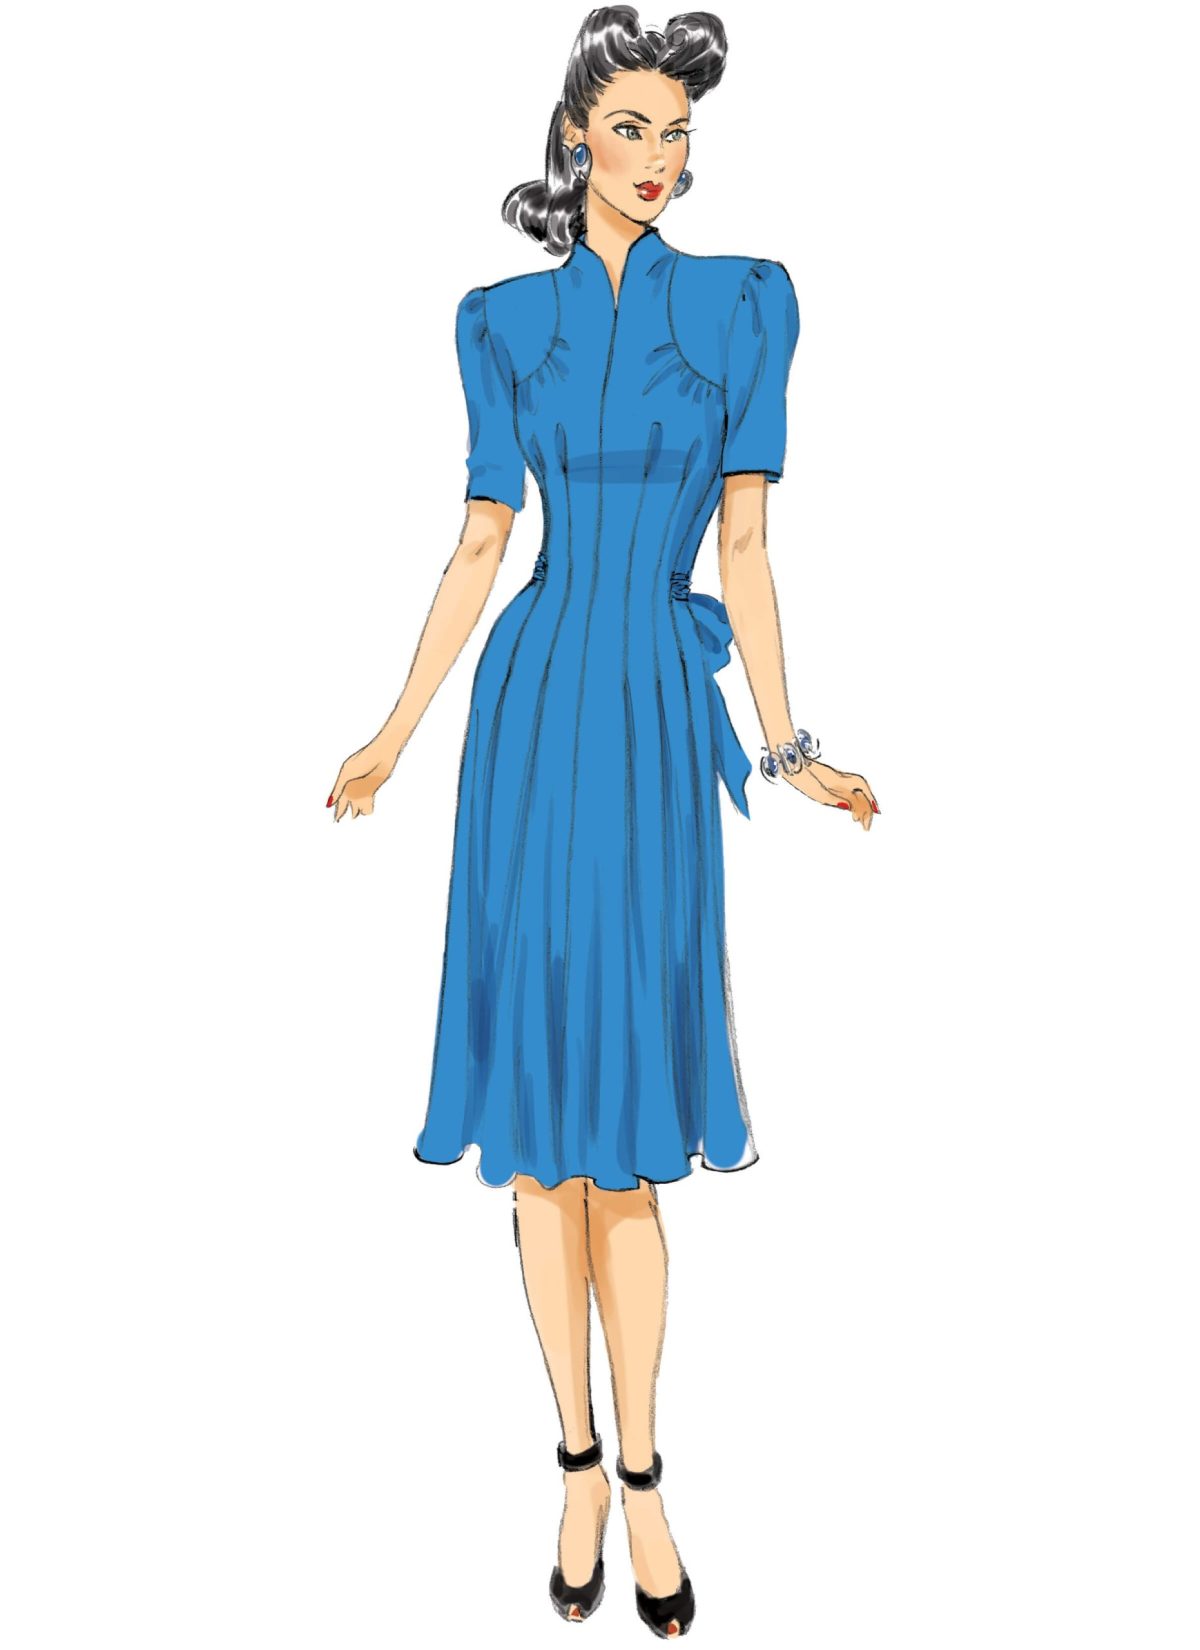 Butterick Sewing Pattern B6485 Misses' Dresses with Shoulder and Bust Detail, Waist Tie, and Sleeve Variations